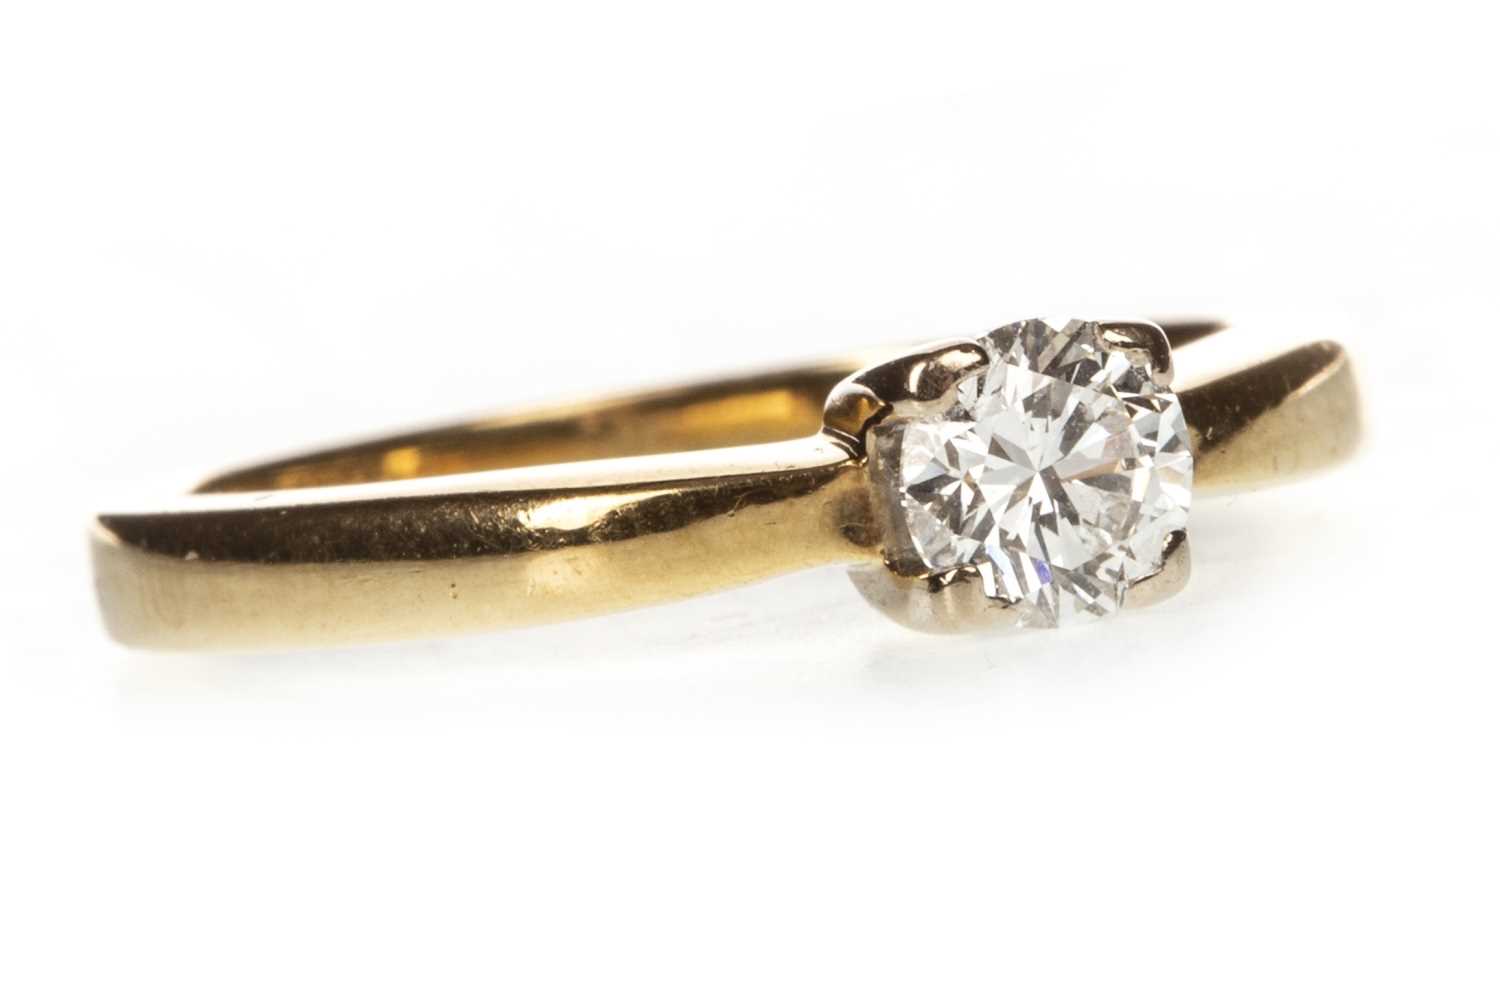 Lot 130 - A DIAMOND SOLITAIRE RING